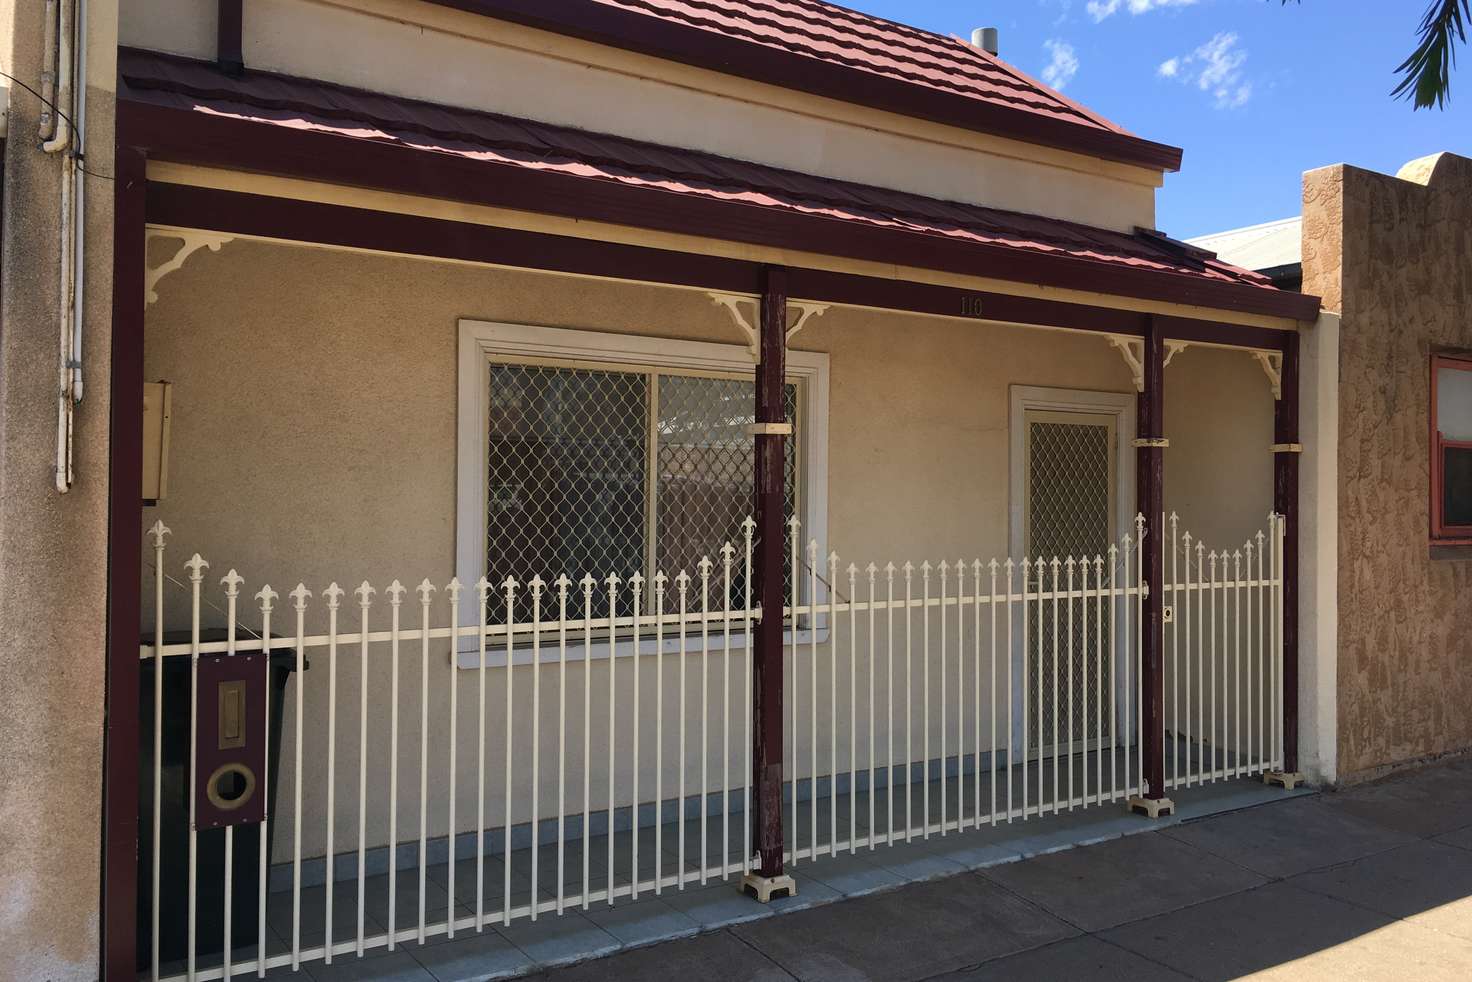 Main view of Homely house listing, 110 Oxide St, Broken Hill NSW 2880